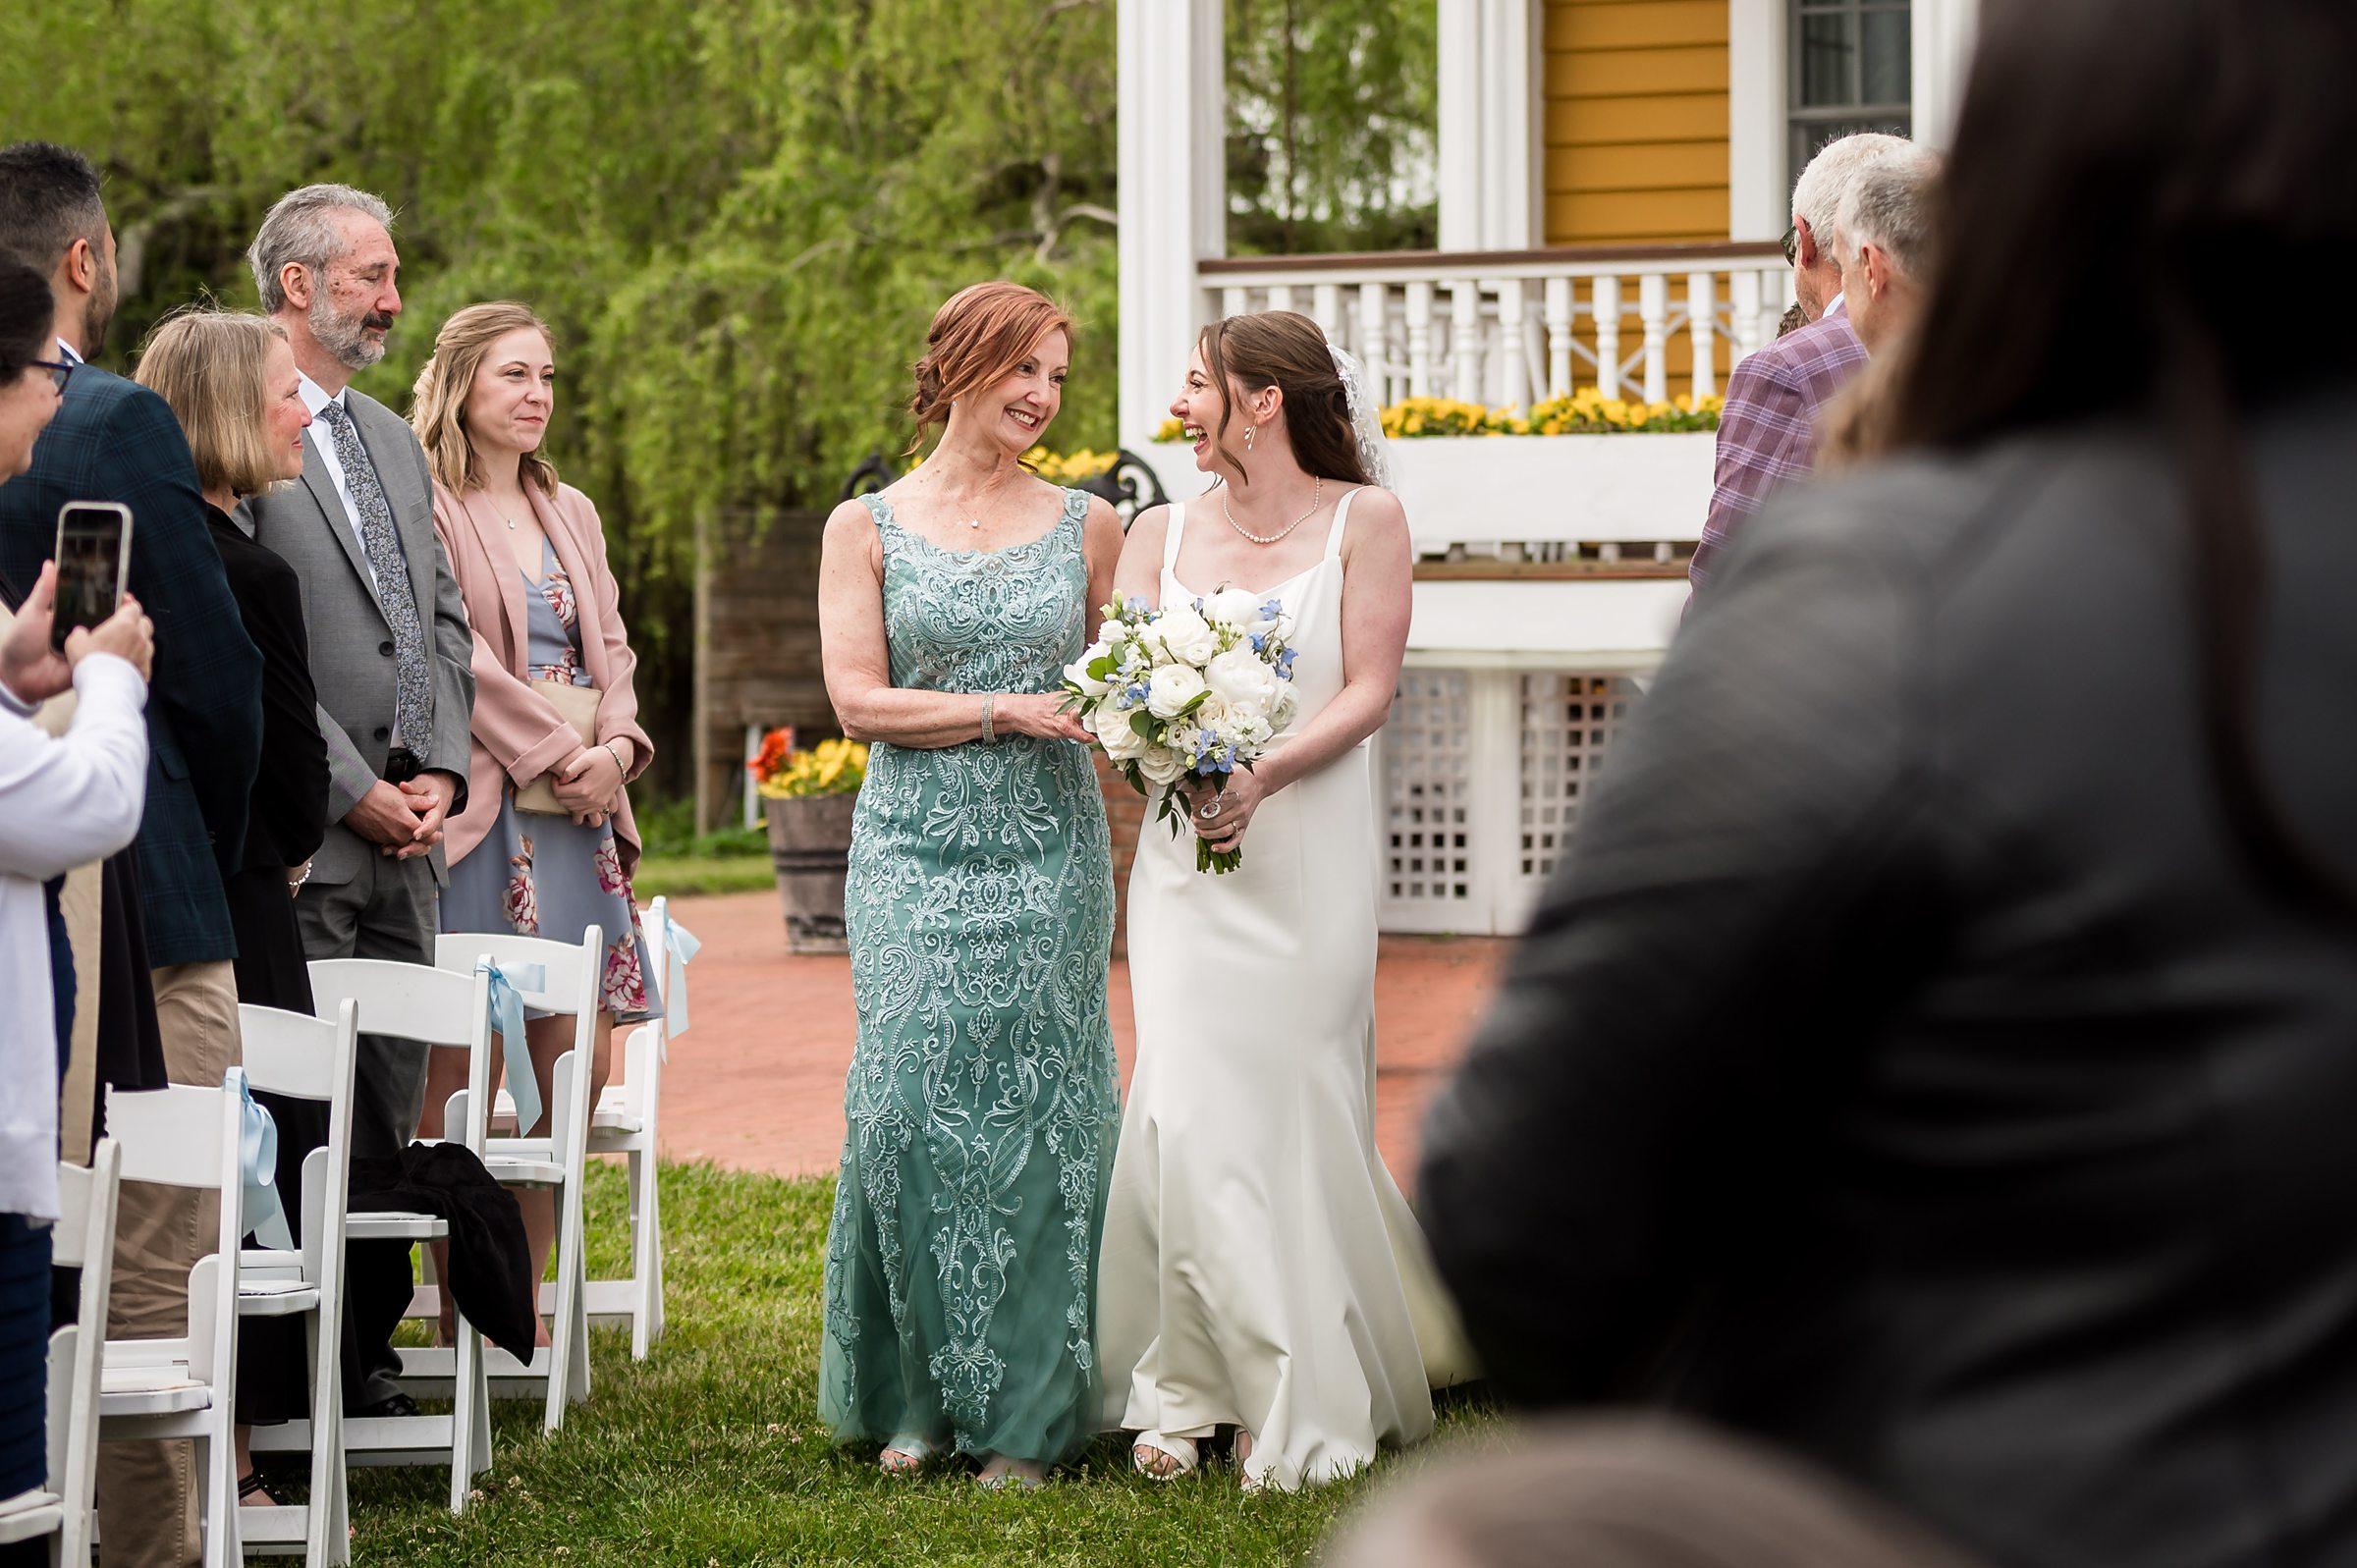 A bride in a white dress holds a bouquet and walks down an outdoor aisle with a woman in a green dress, surrounded by seated and standing guests.